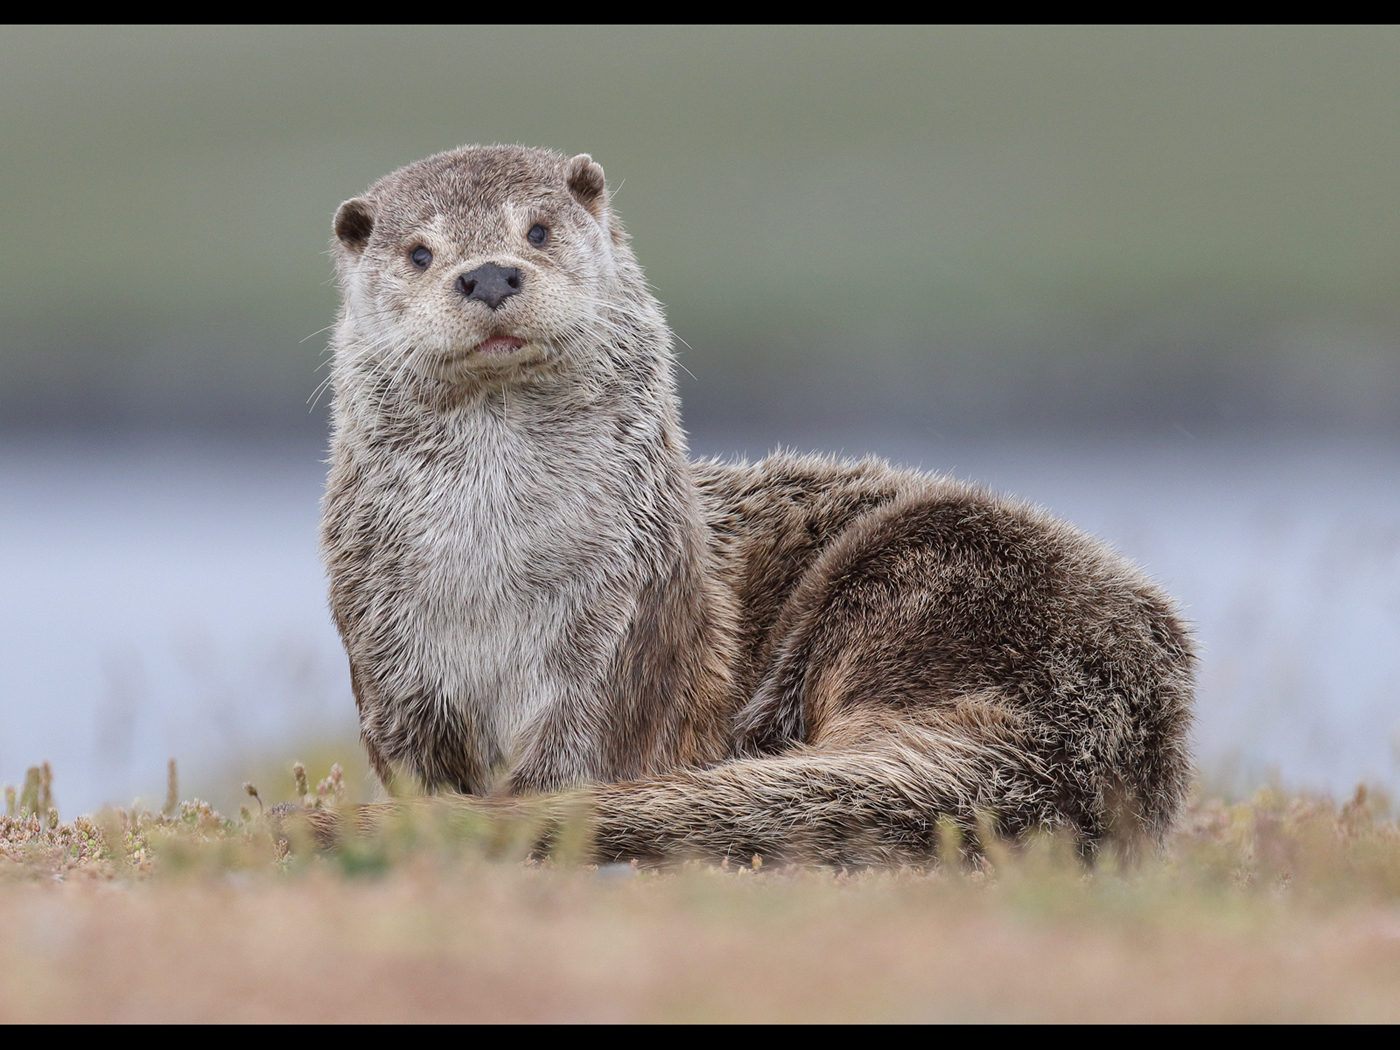 Otter by Dave Tolliday